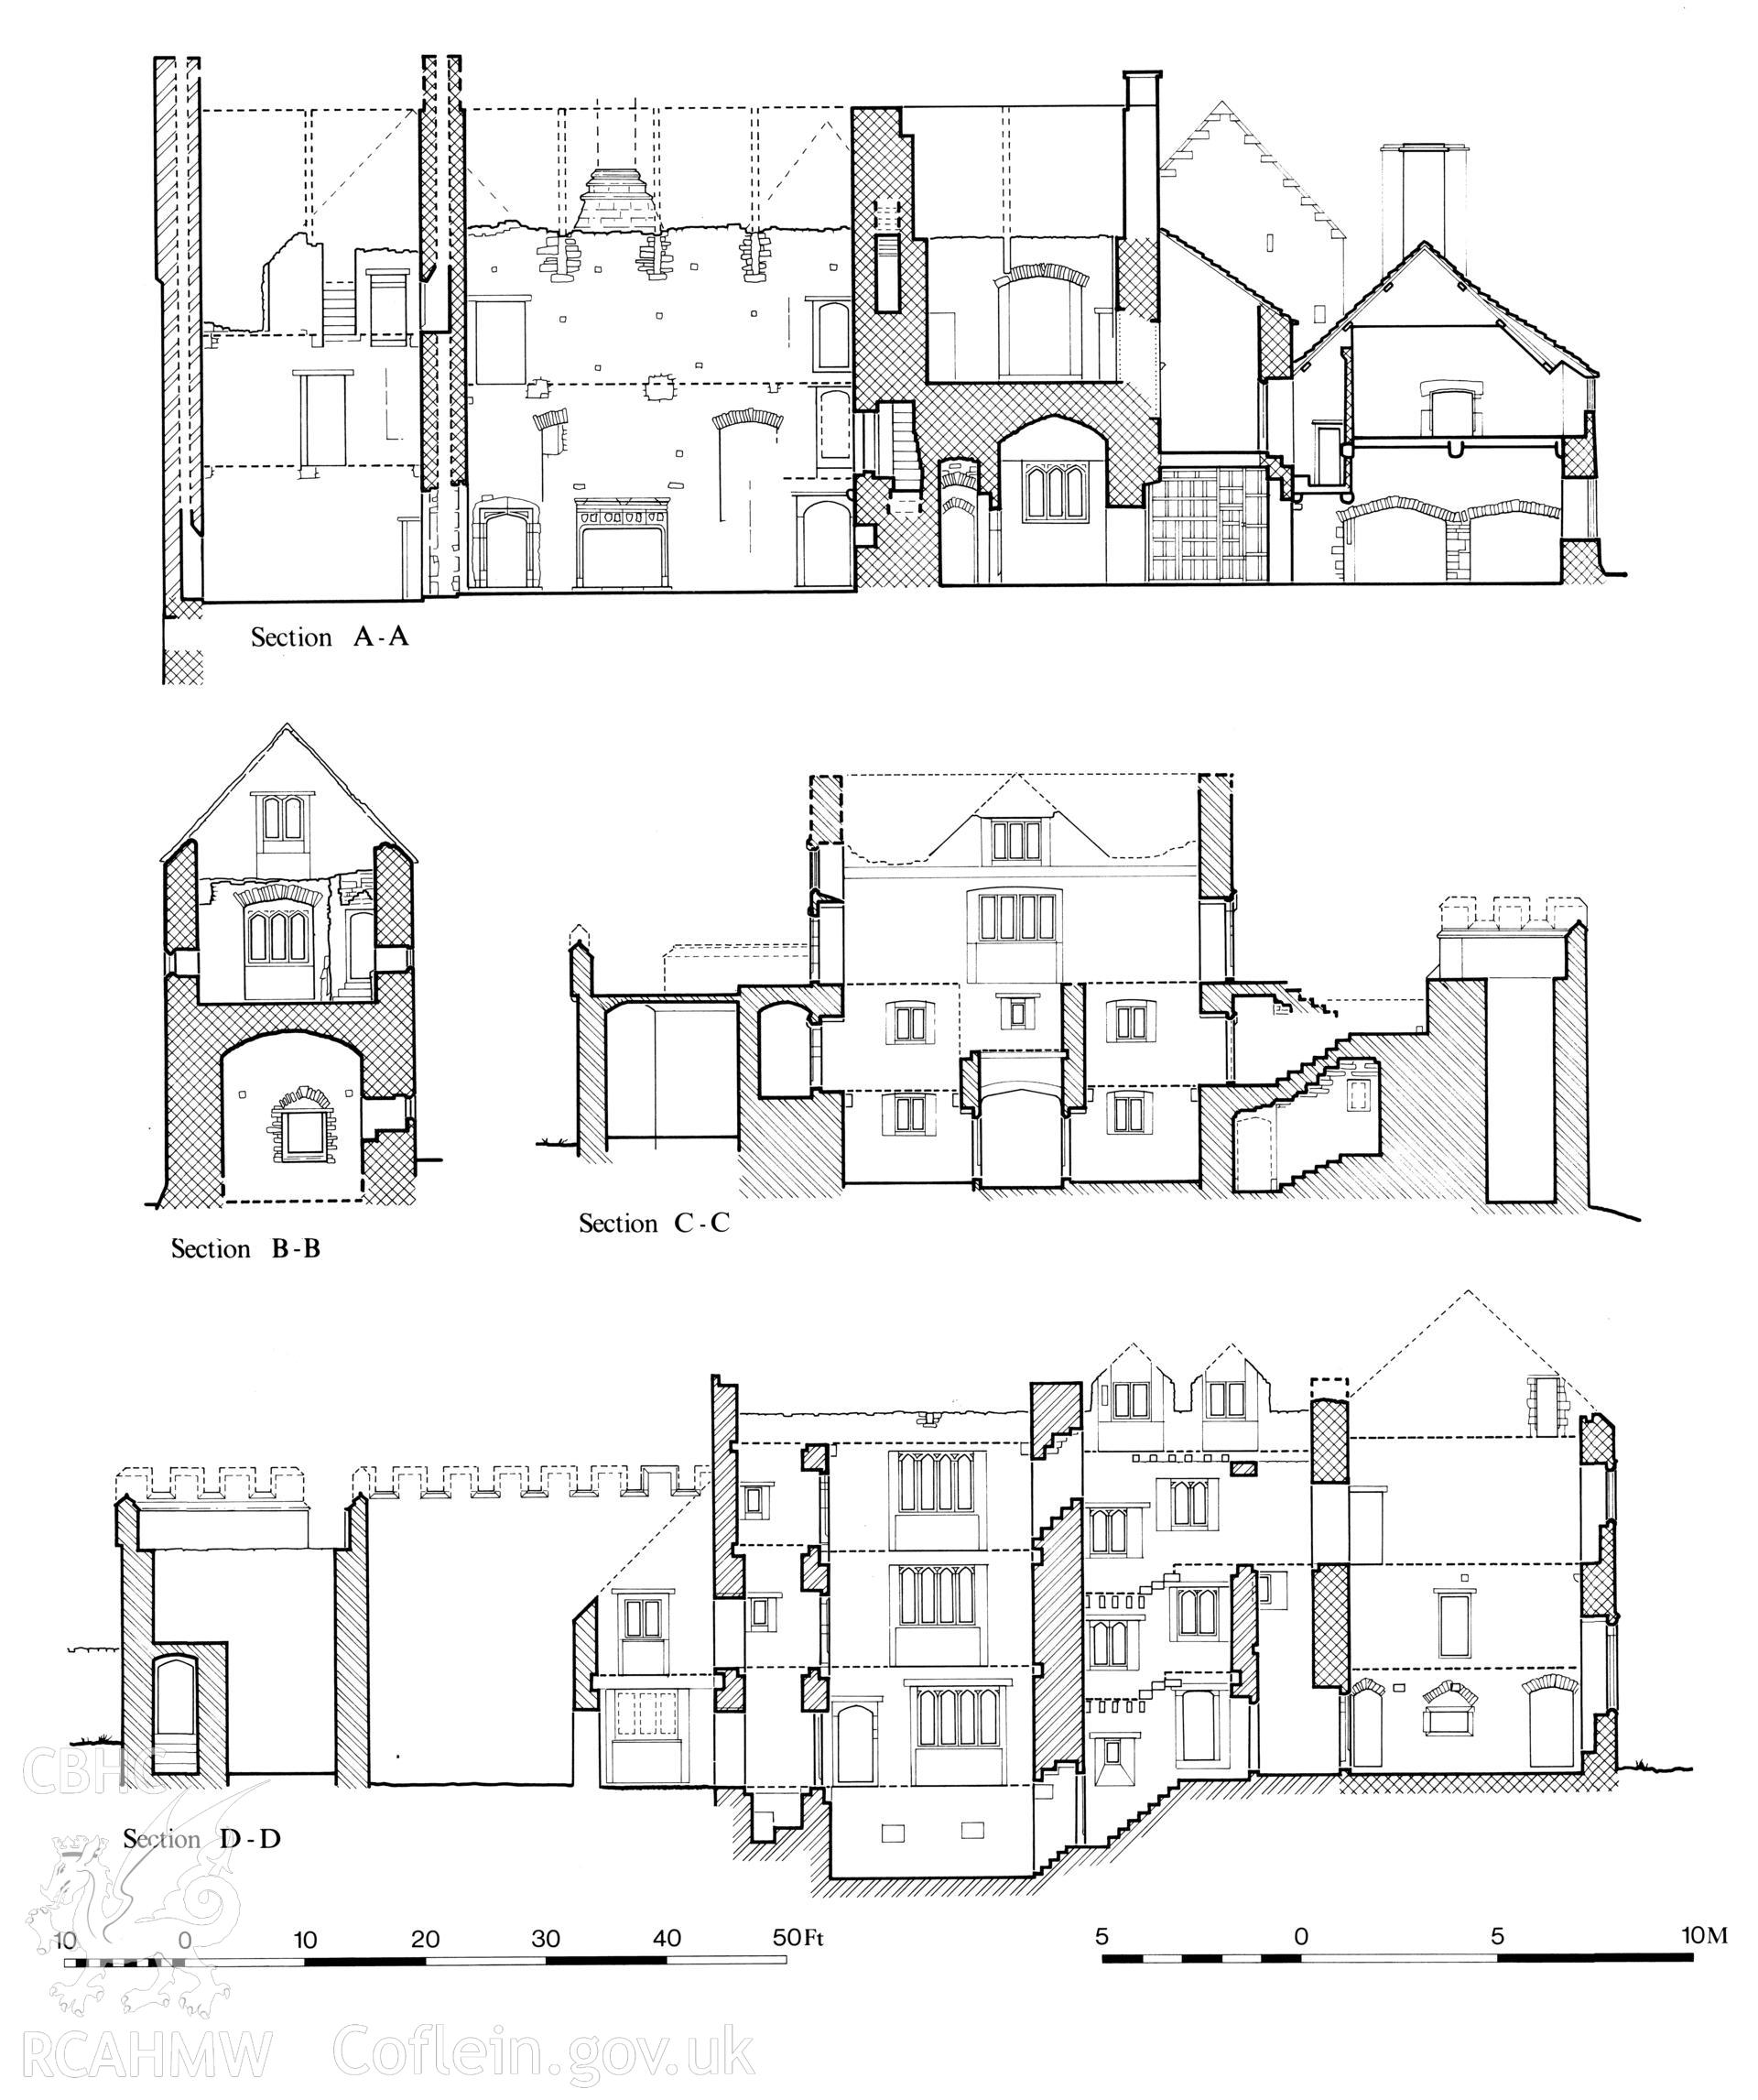 RCAHMW drawing showing section of Old Beaupre, St Hilary, published in Glamorgan IV, fig 4.